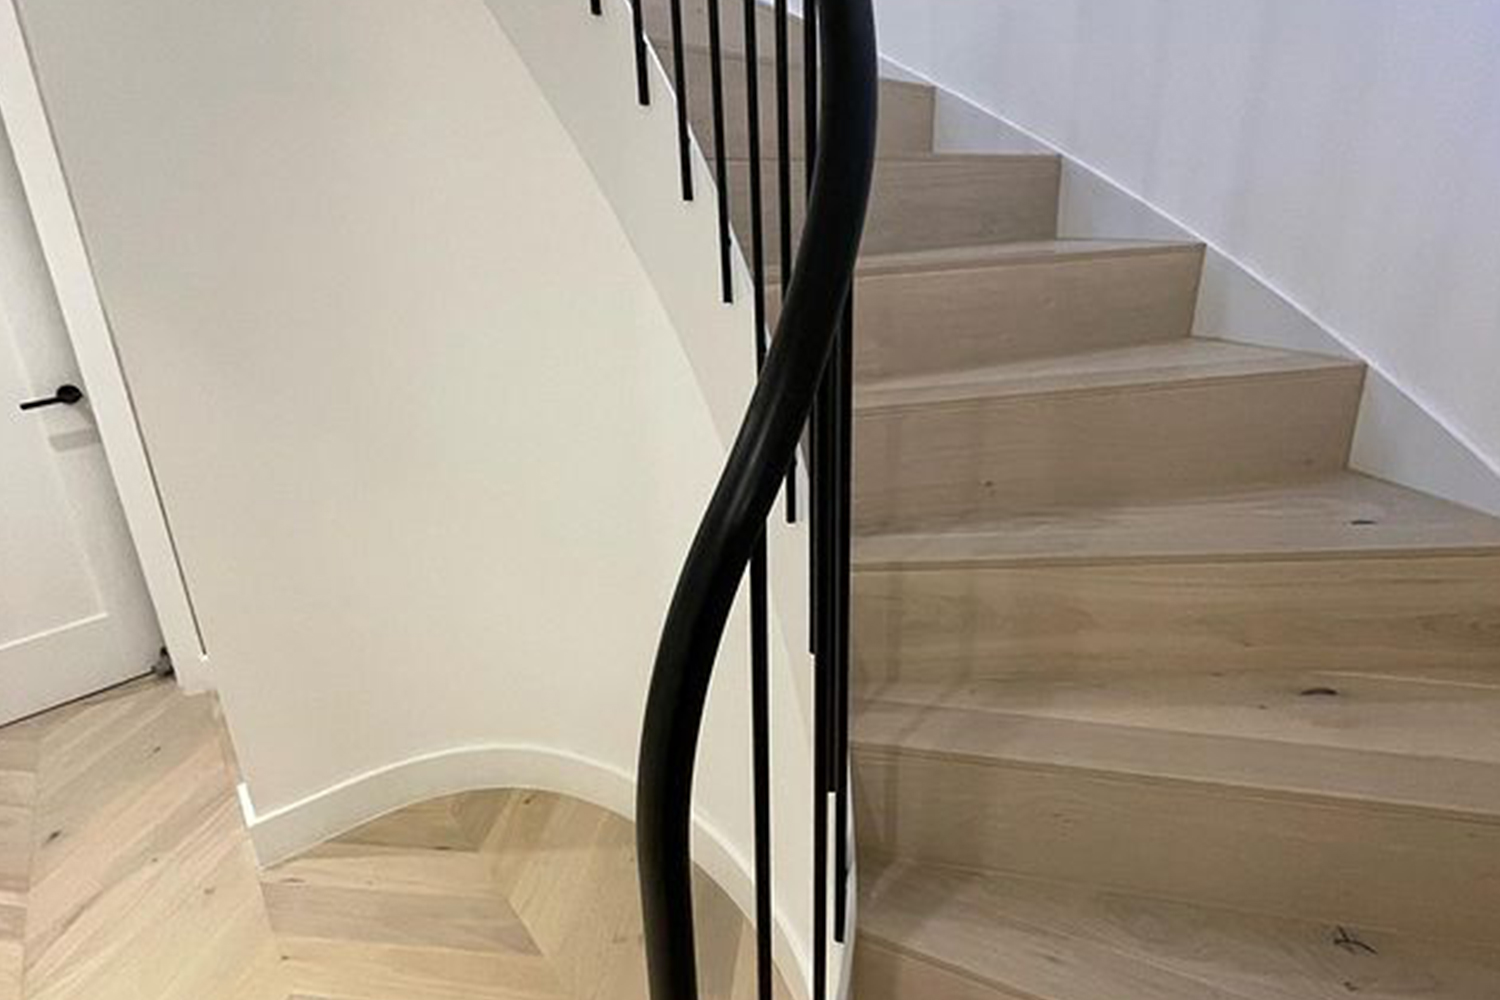 A staircase black railings after finishing